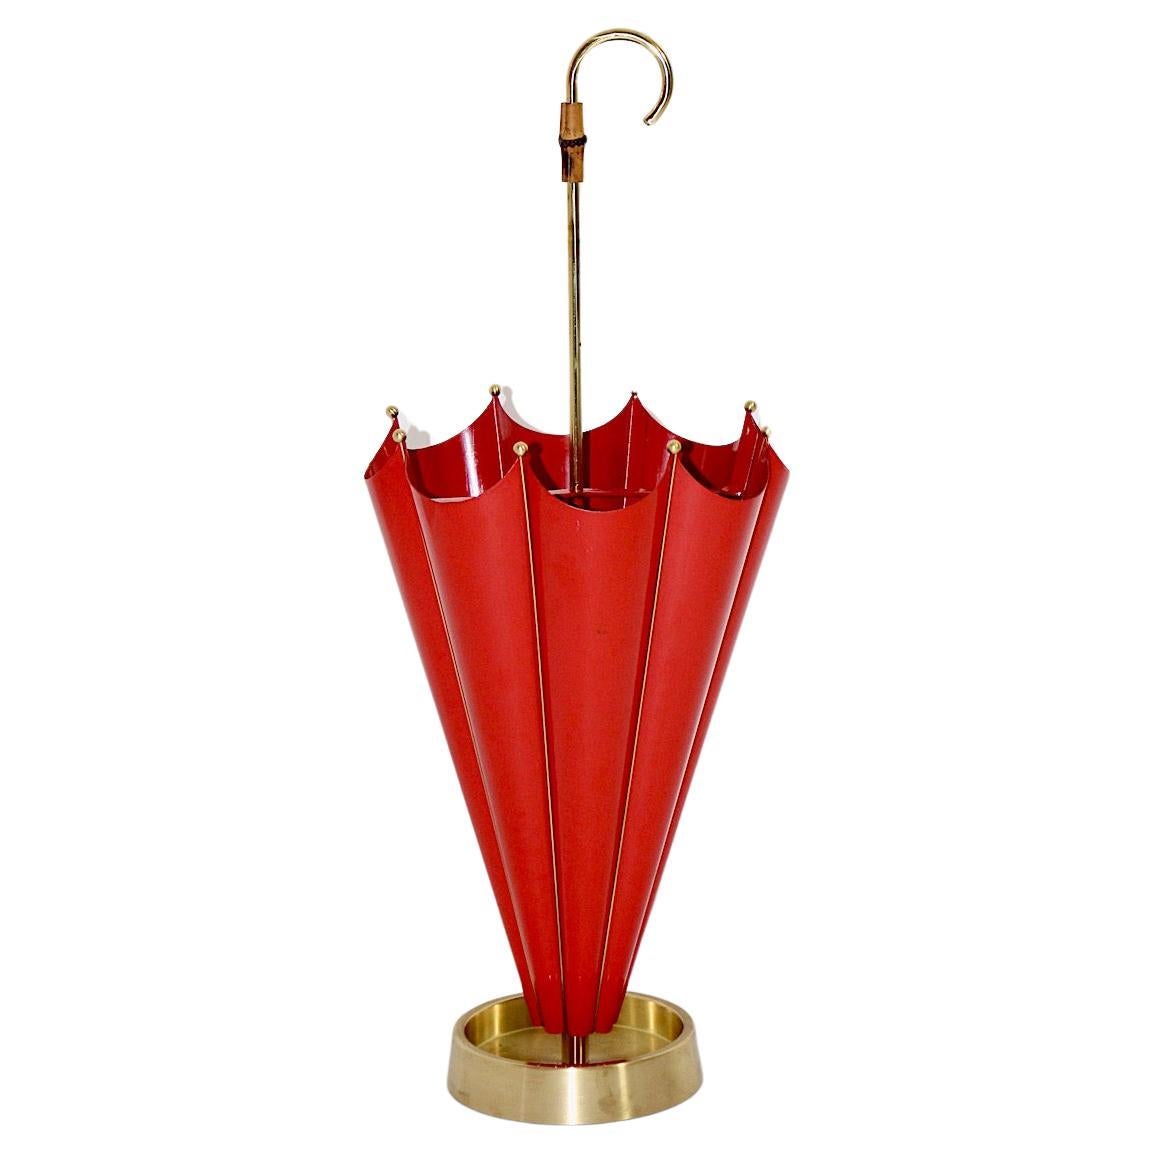 Mid-Century Modern Vintage Red Metal Brass Umbrella Stand Cane Holder 1950 Italy For Sale